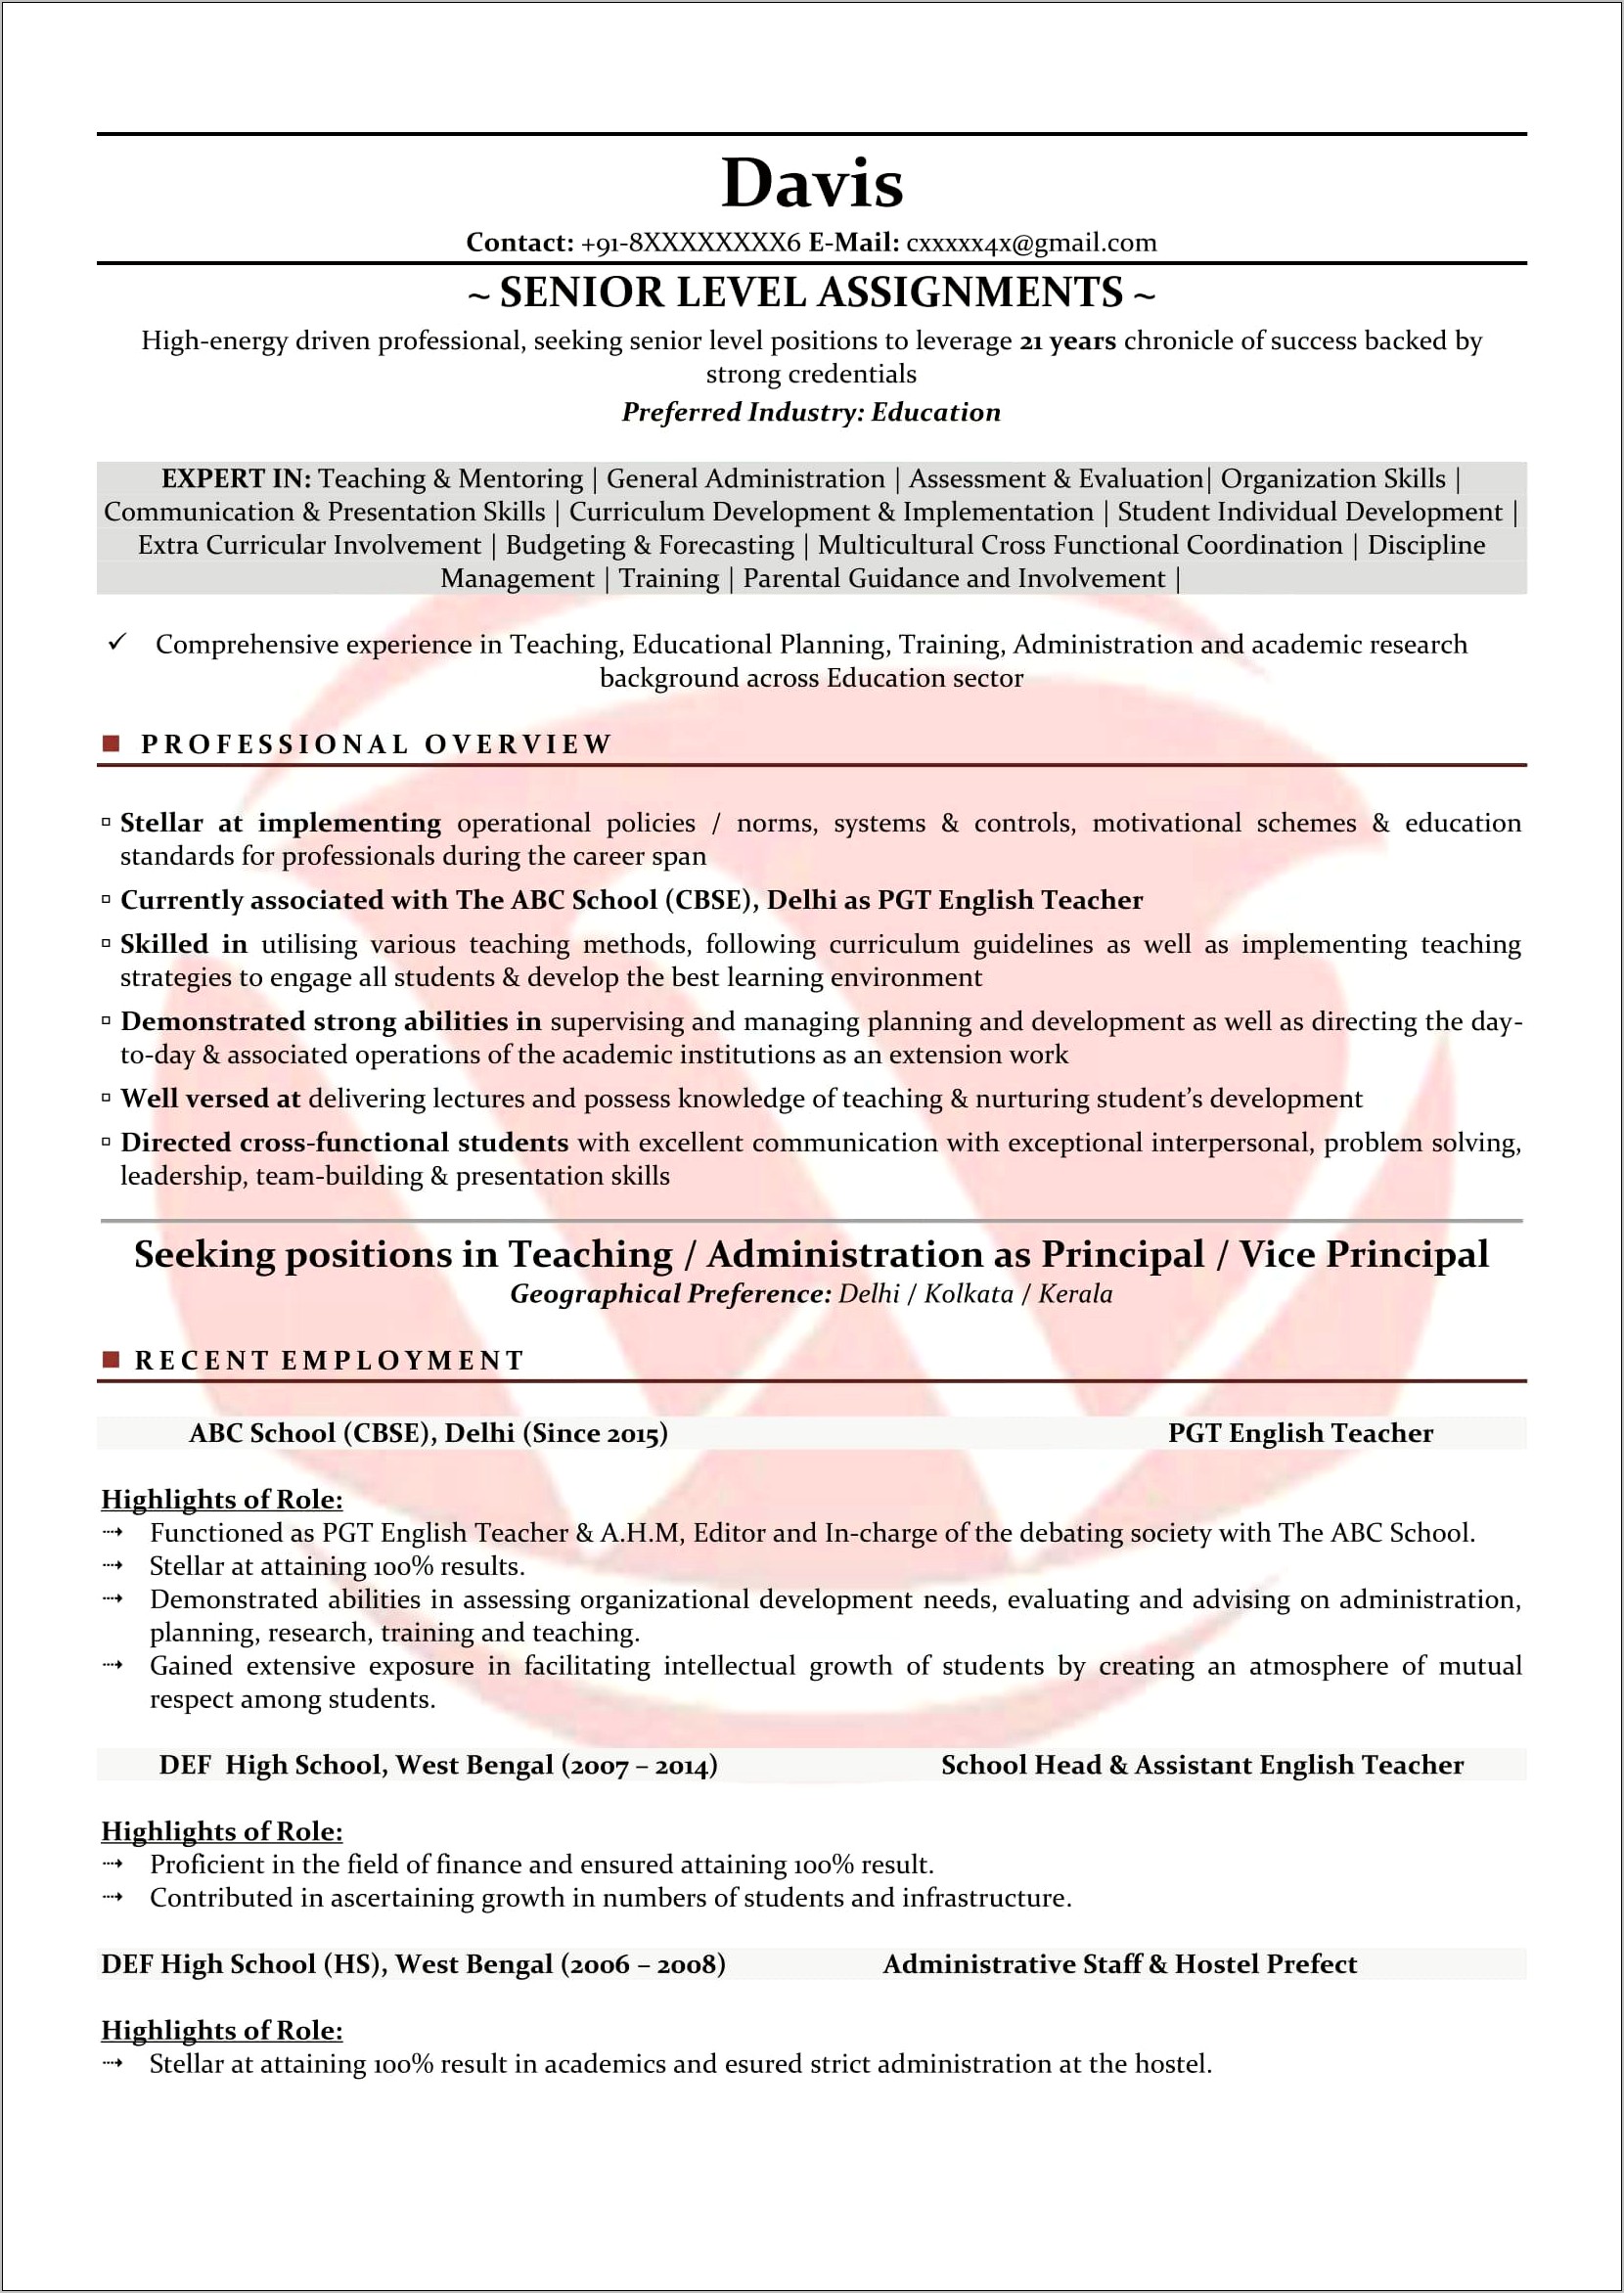 Resume Template For Indian Teaching Job